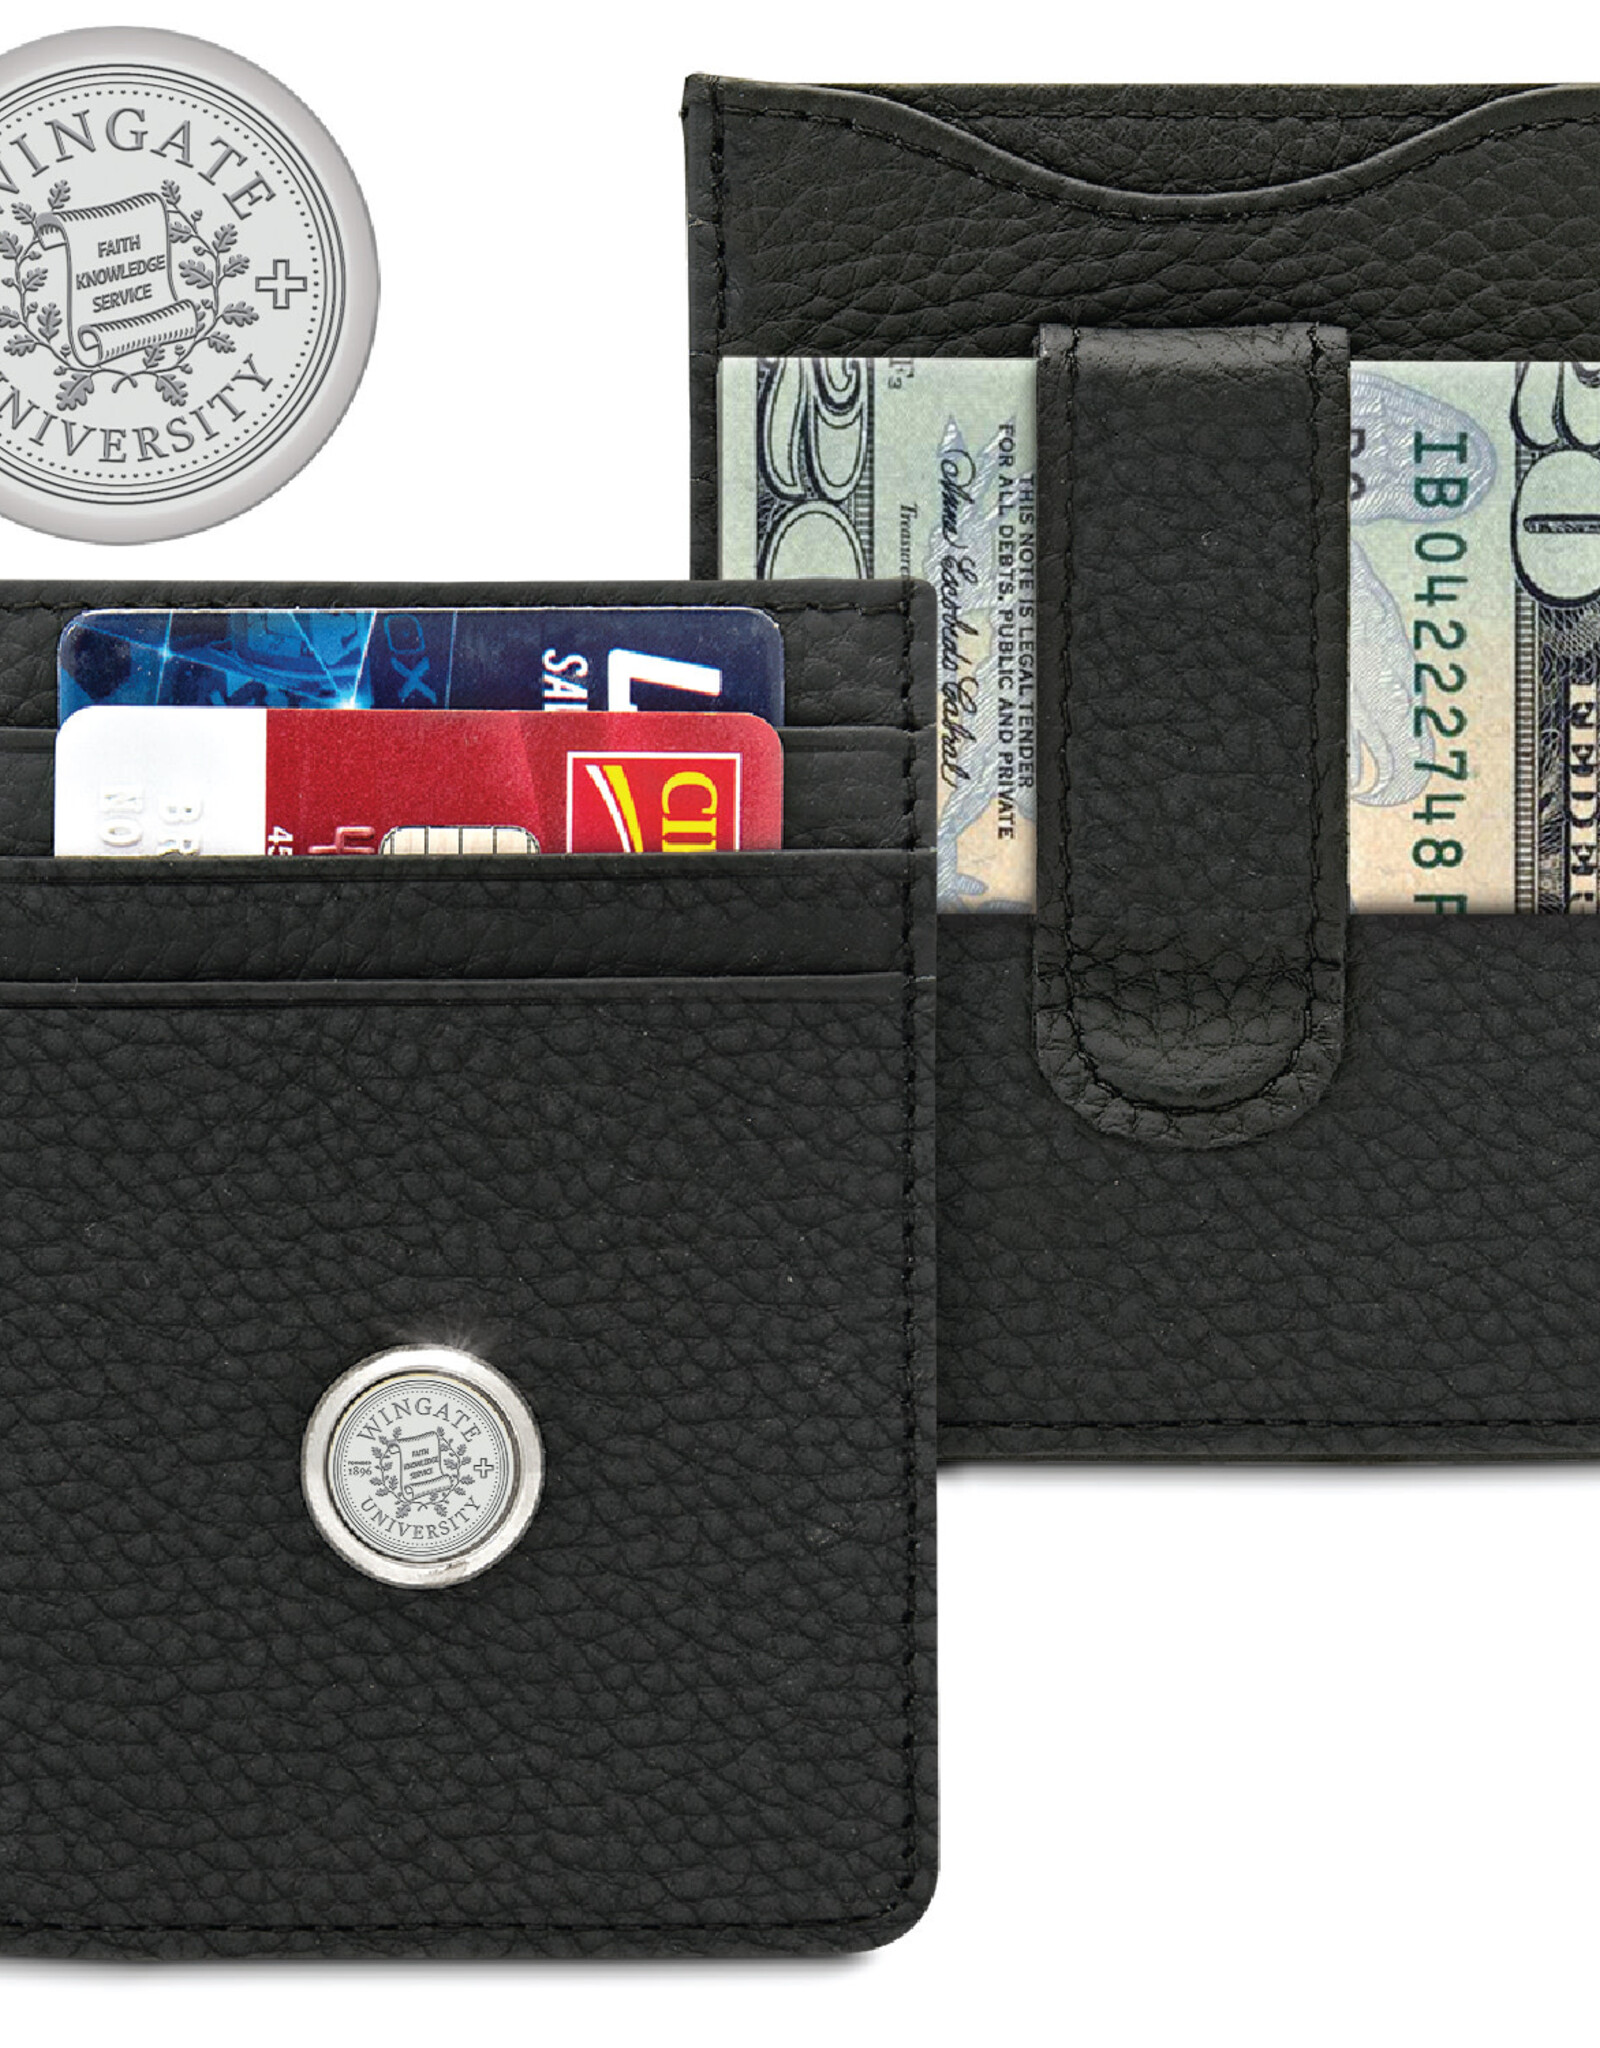 DROP SHIP ONLY Mens Black Leather Money Clipcard Holder with silver Wingate University Seal (ONLINE ONLY)